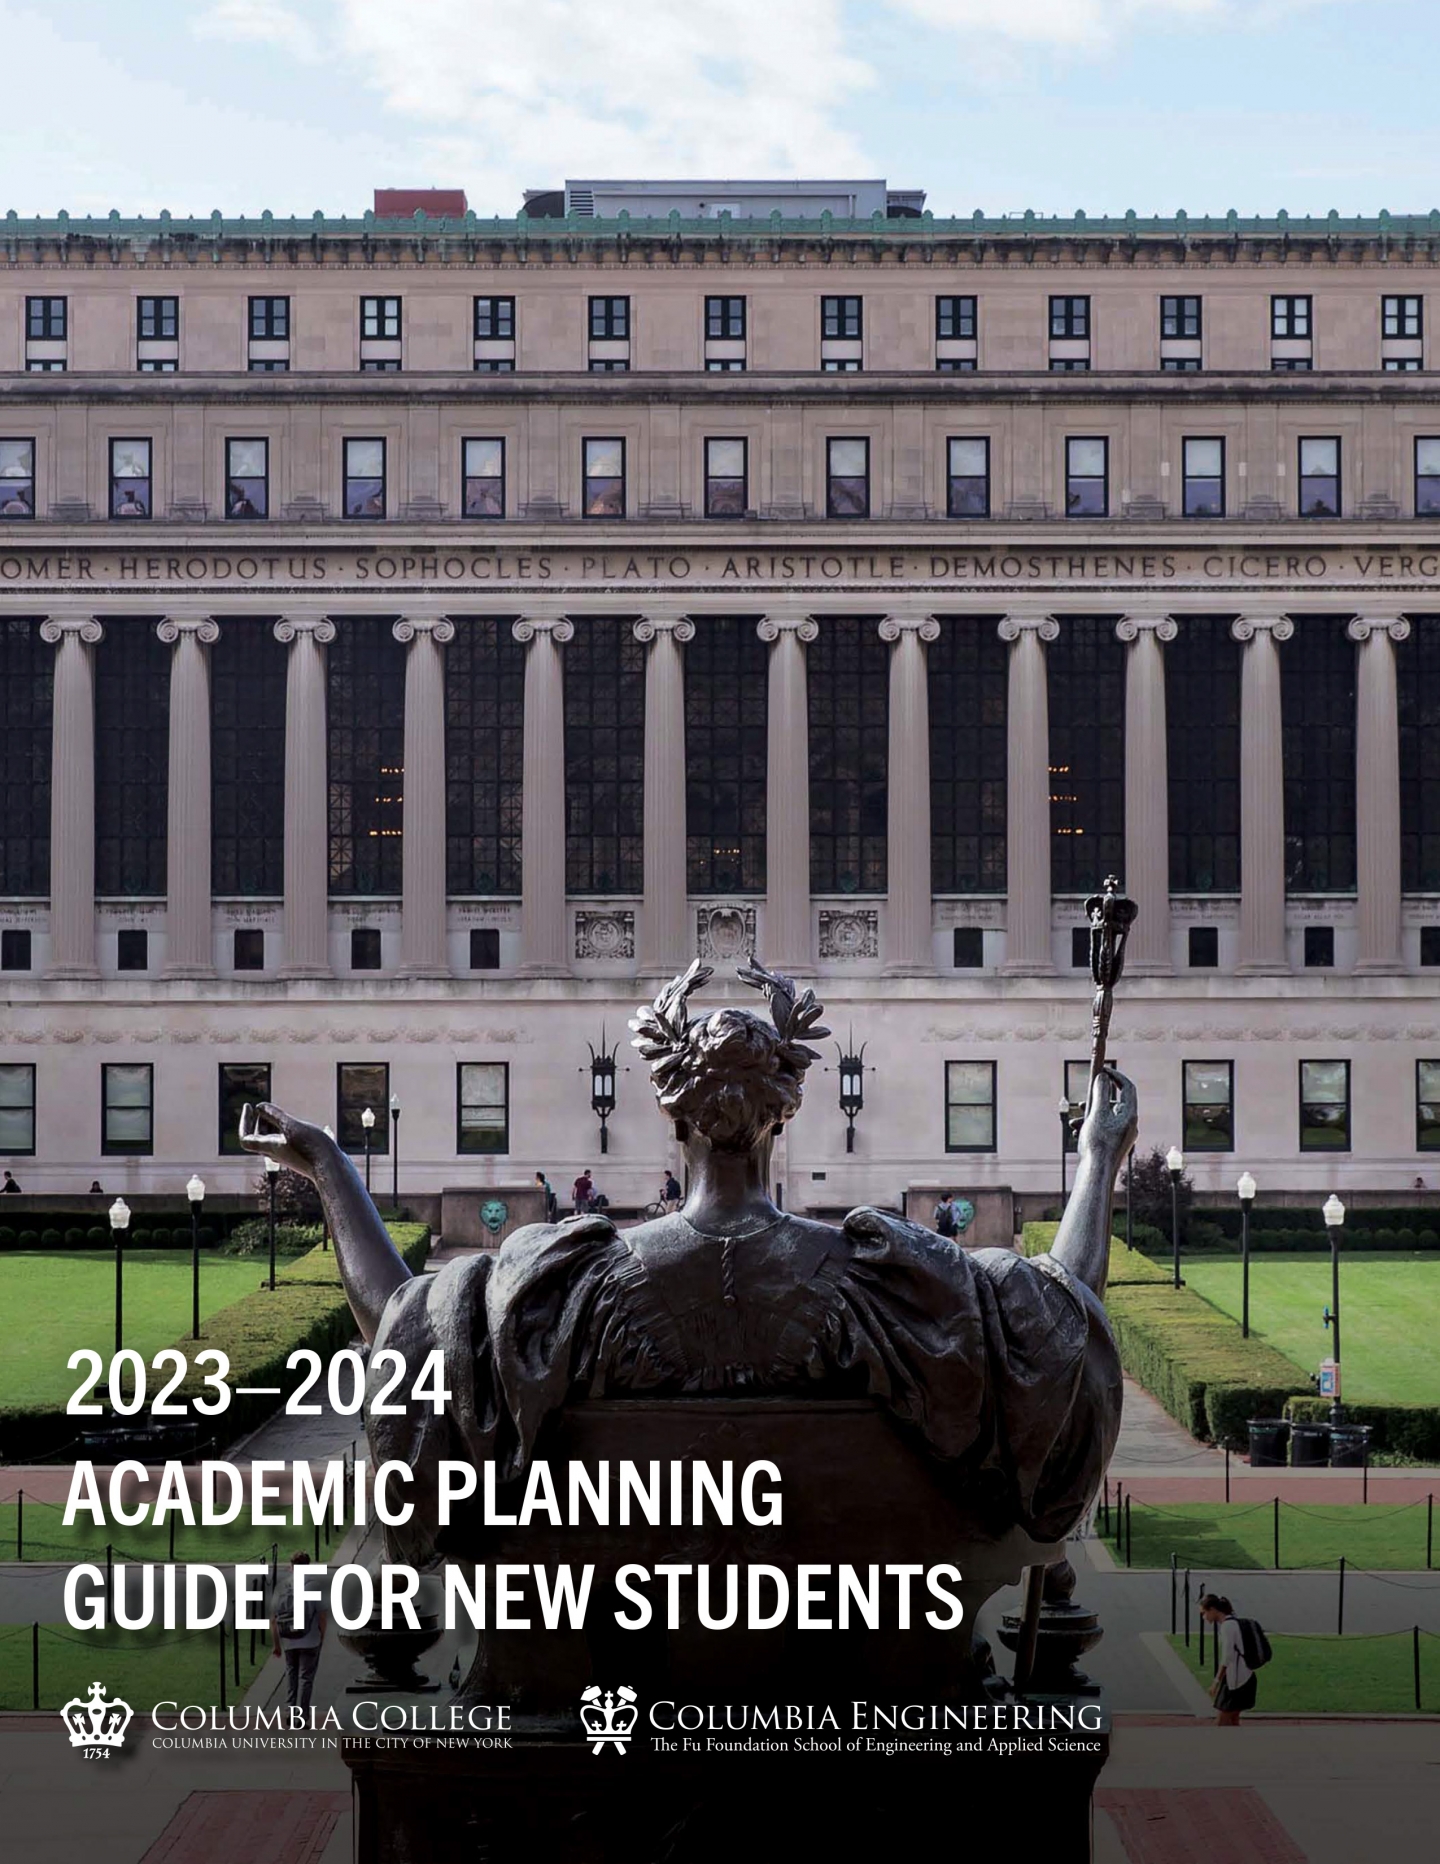 2023-2024 Academic Planning Guide for New Students